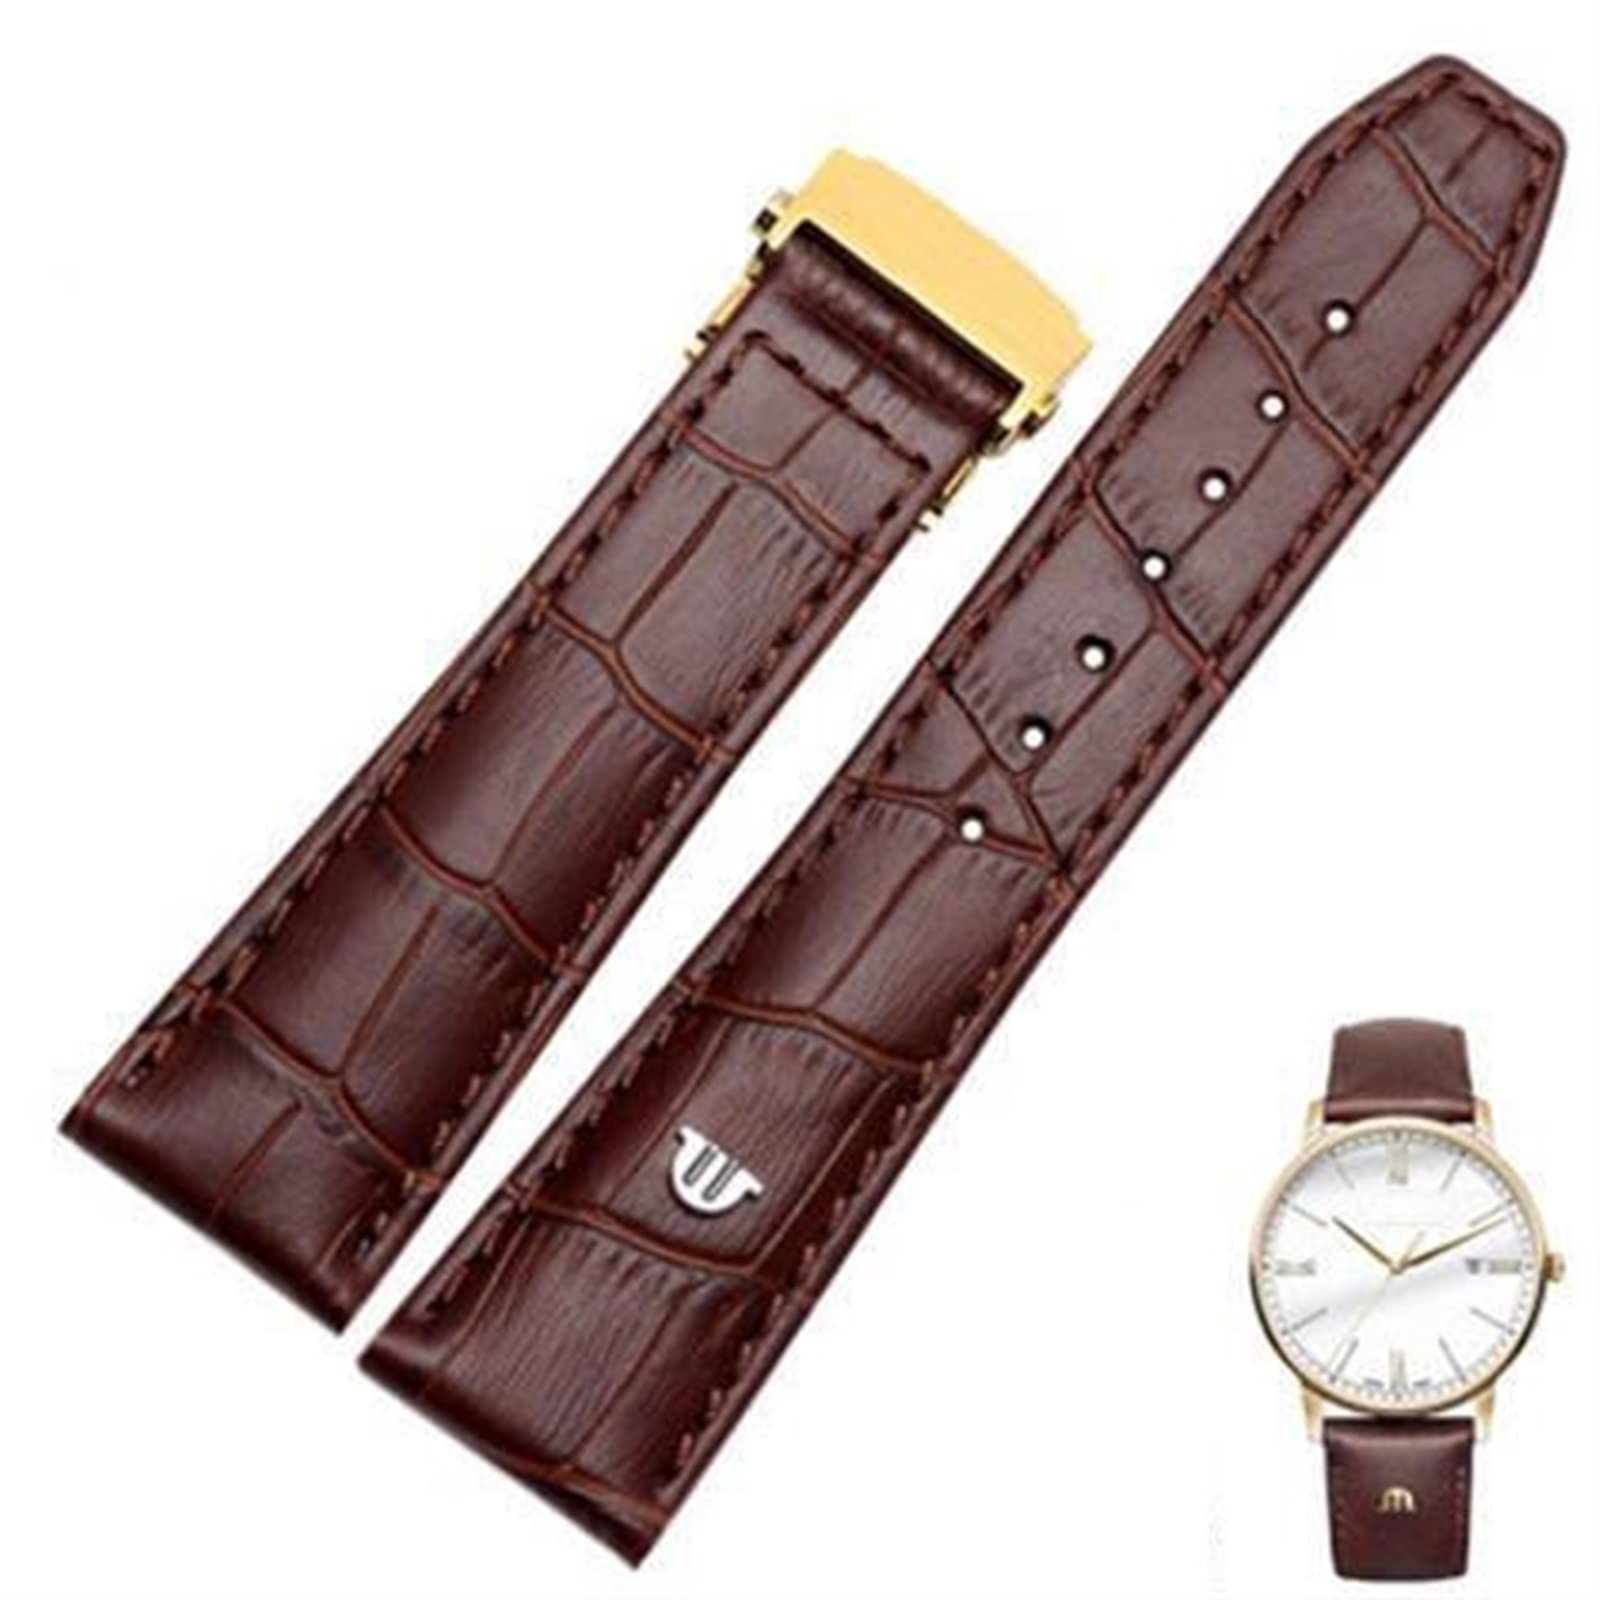 COEPMG Genuine Leather watchband For MAURICE LACROIX watches strap black brown 20mm 22mm with folding buckle bracelet